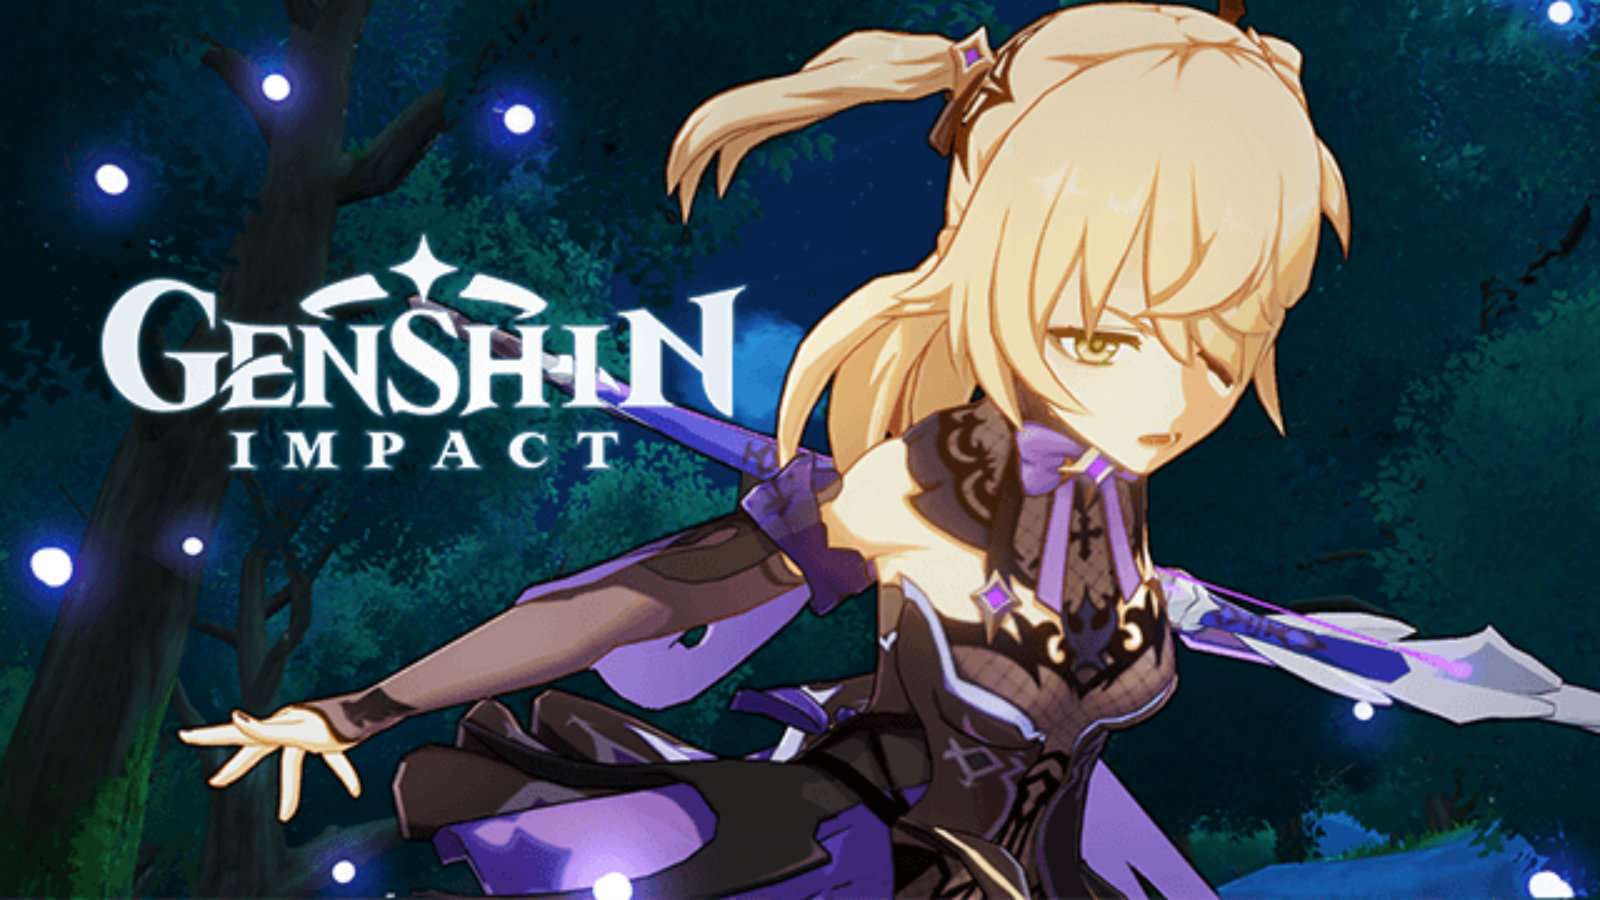 A YouTuber is quitting Genshin Impact for its gacha system